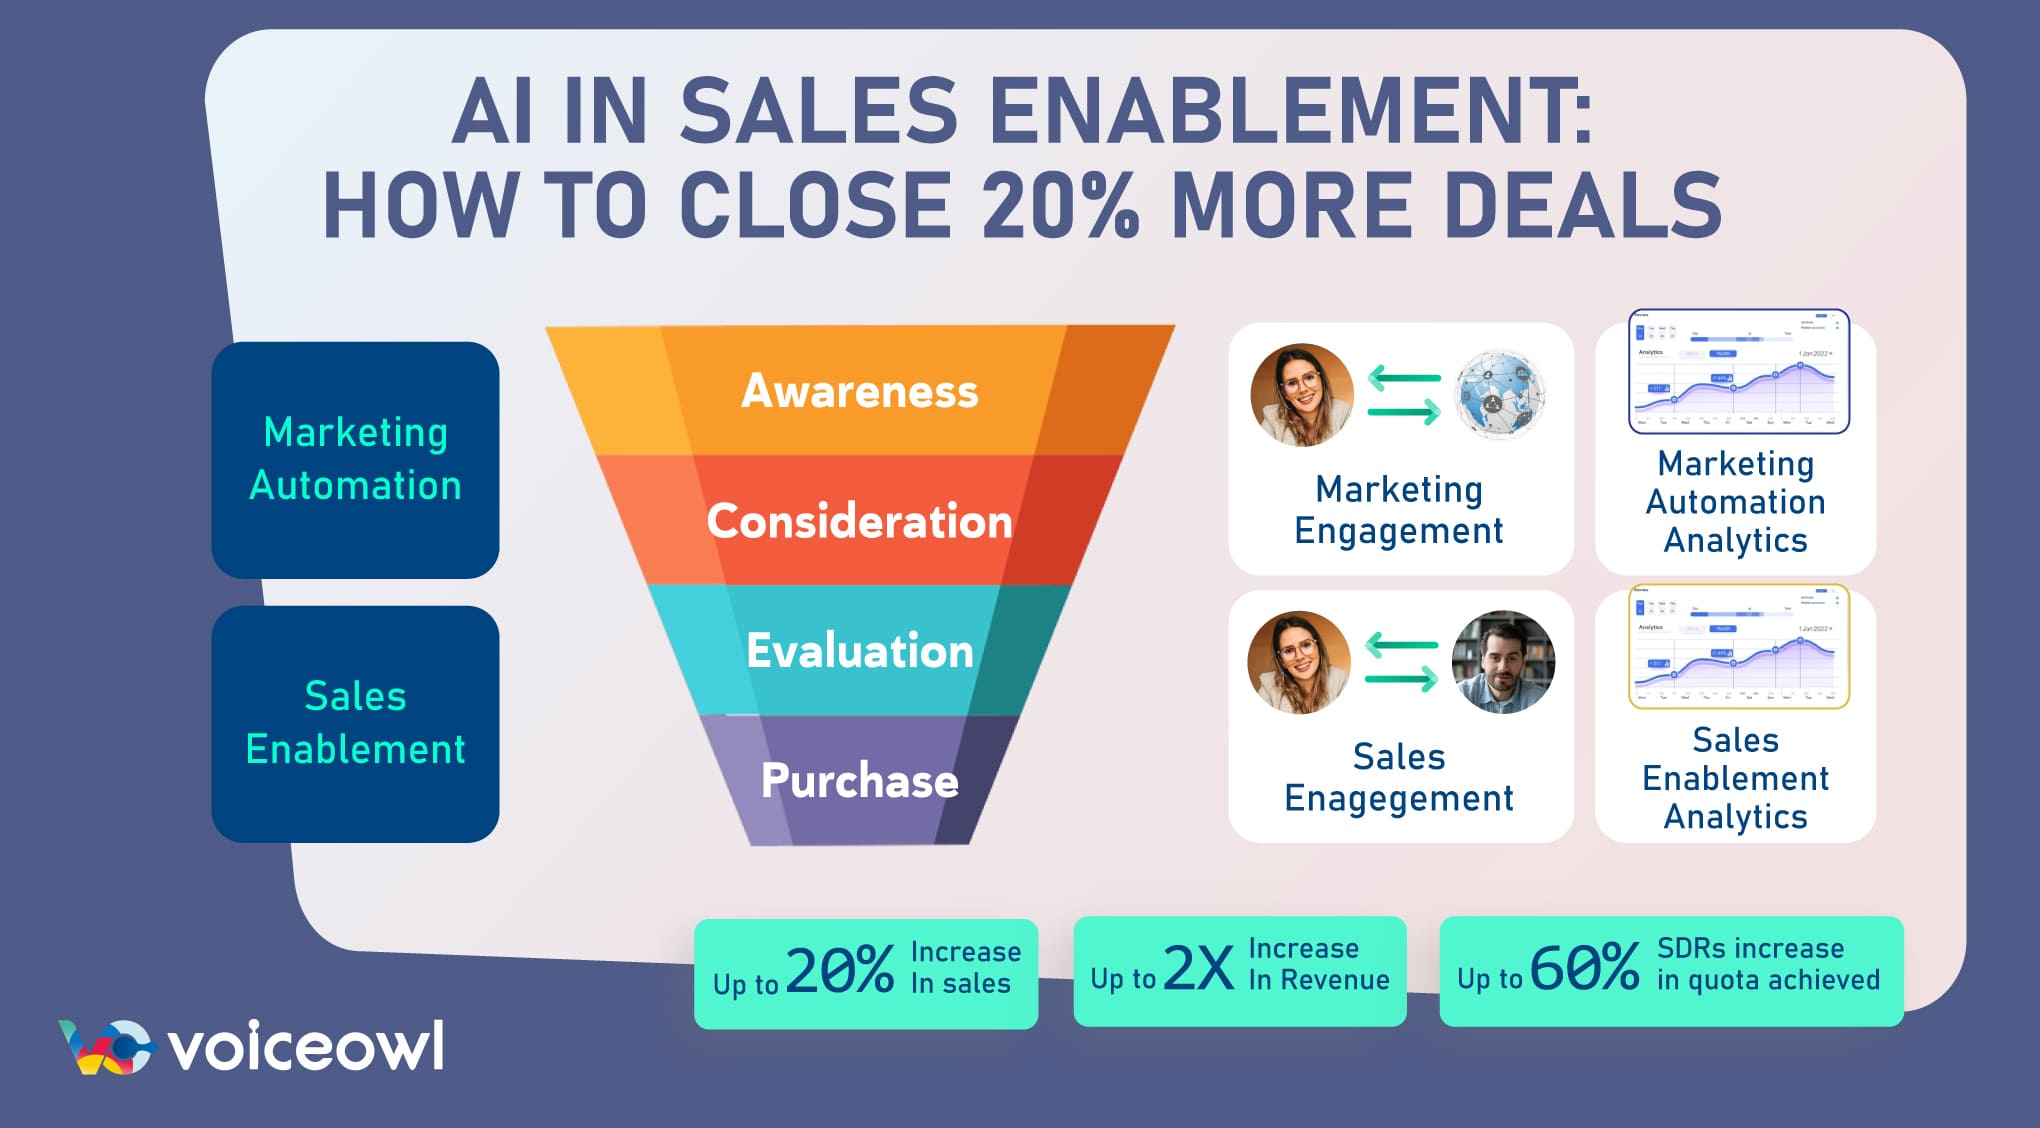 AI in Sales Enablement: How to Close 20% More Deals